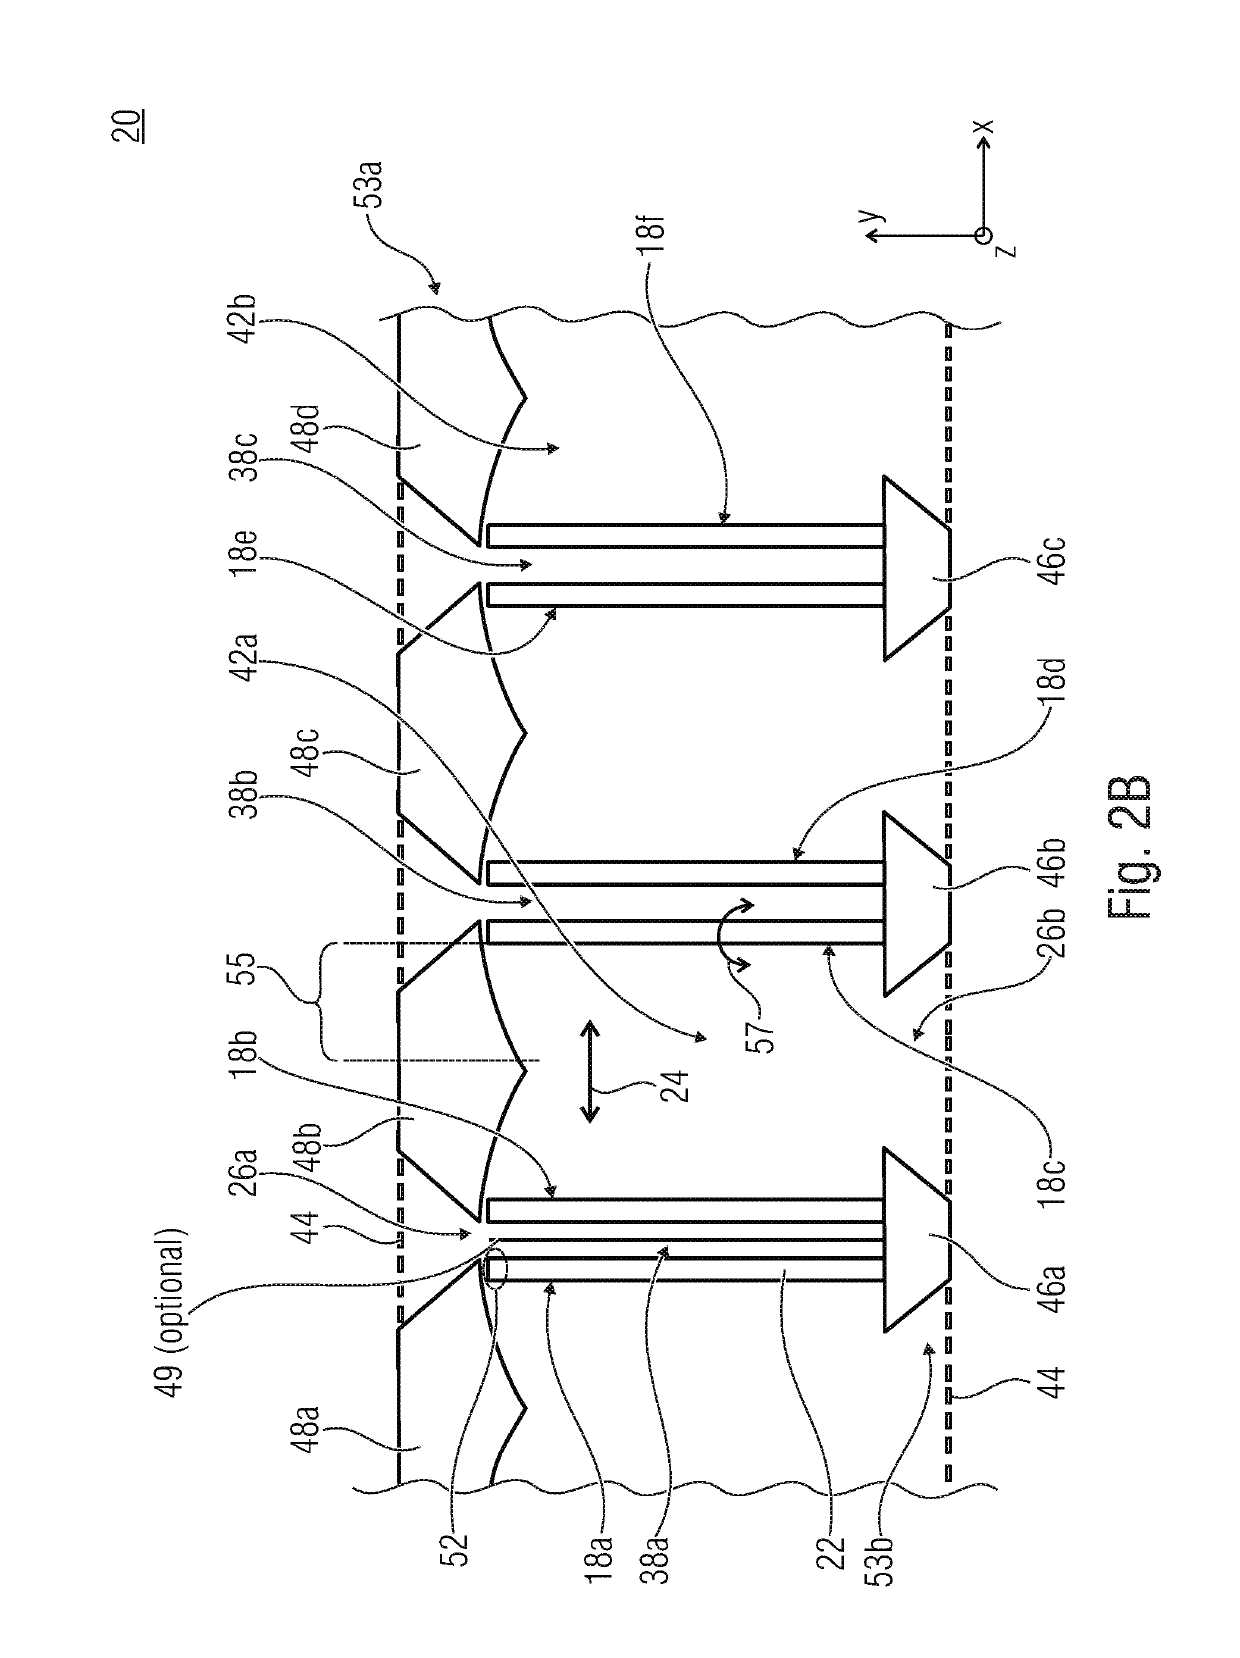 MEMS transducer for interacting with a volume flow of a fluid and method for manufacturing the same